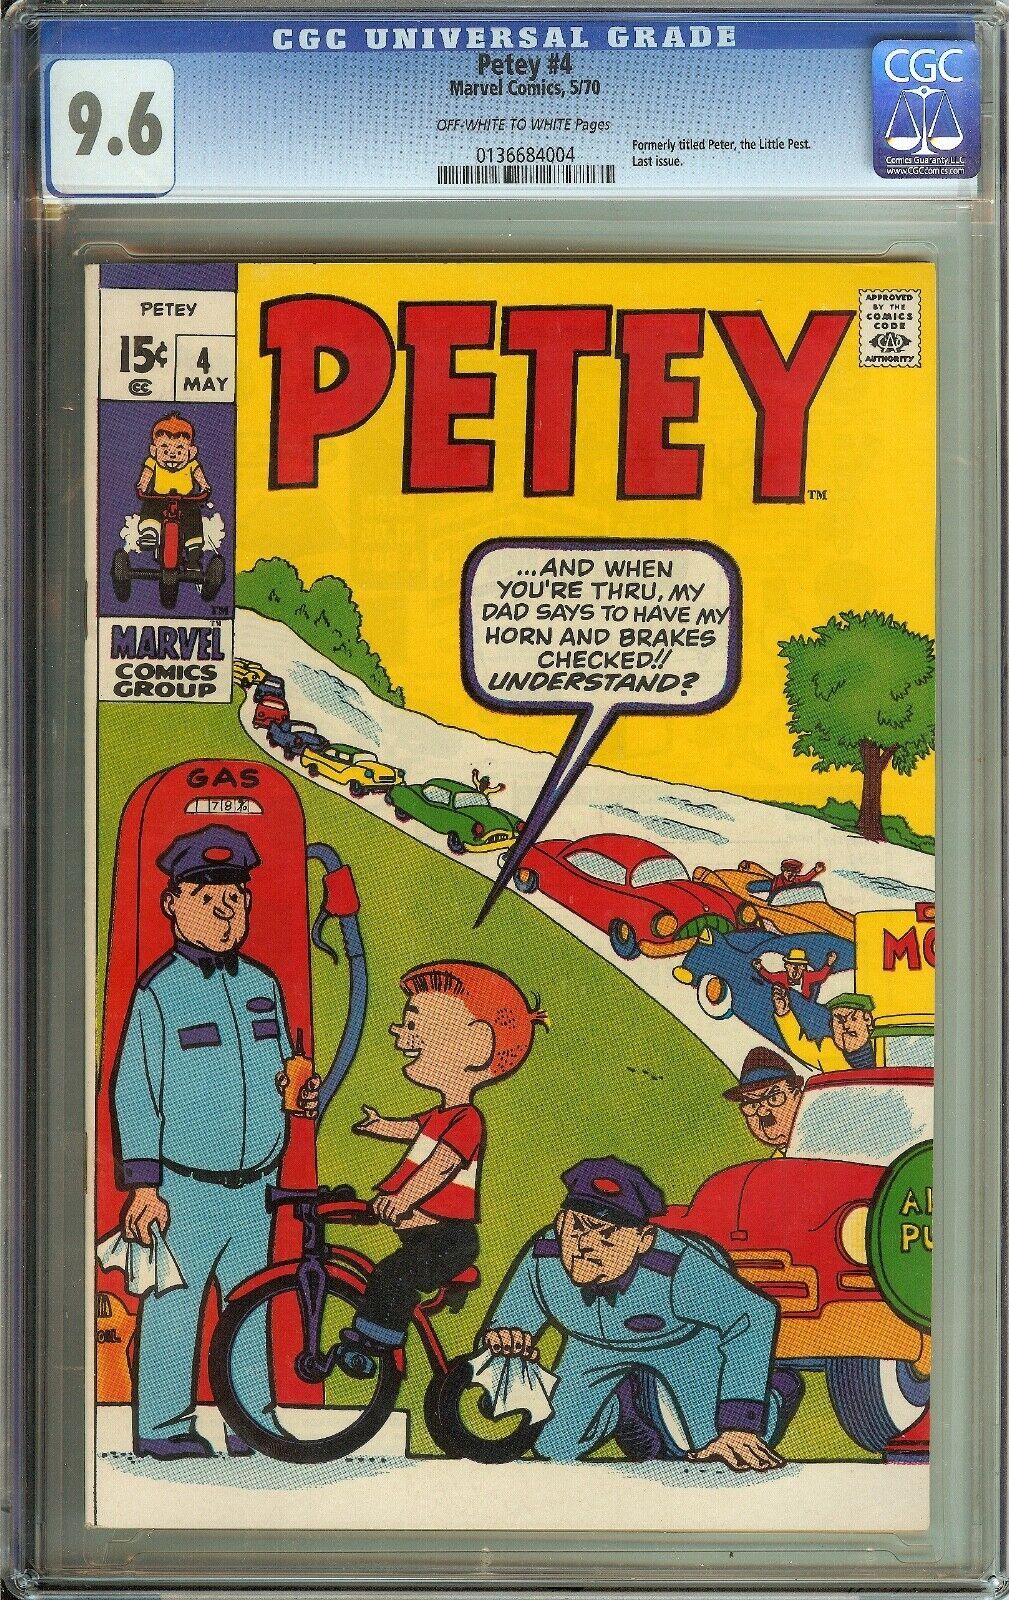 PETEY 4 CGC 96 OWWH PAGES TIED FOR HIGHEST GRADED ON THE CENSUS